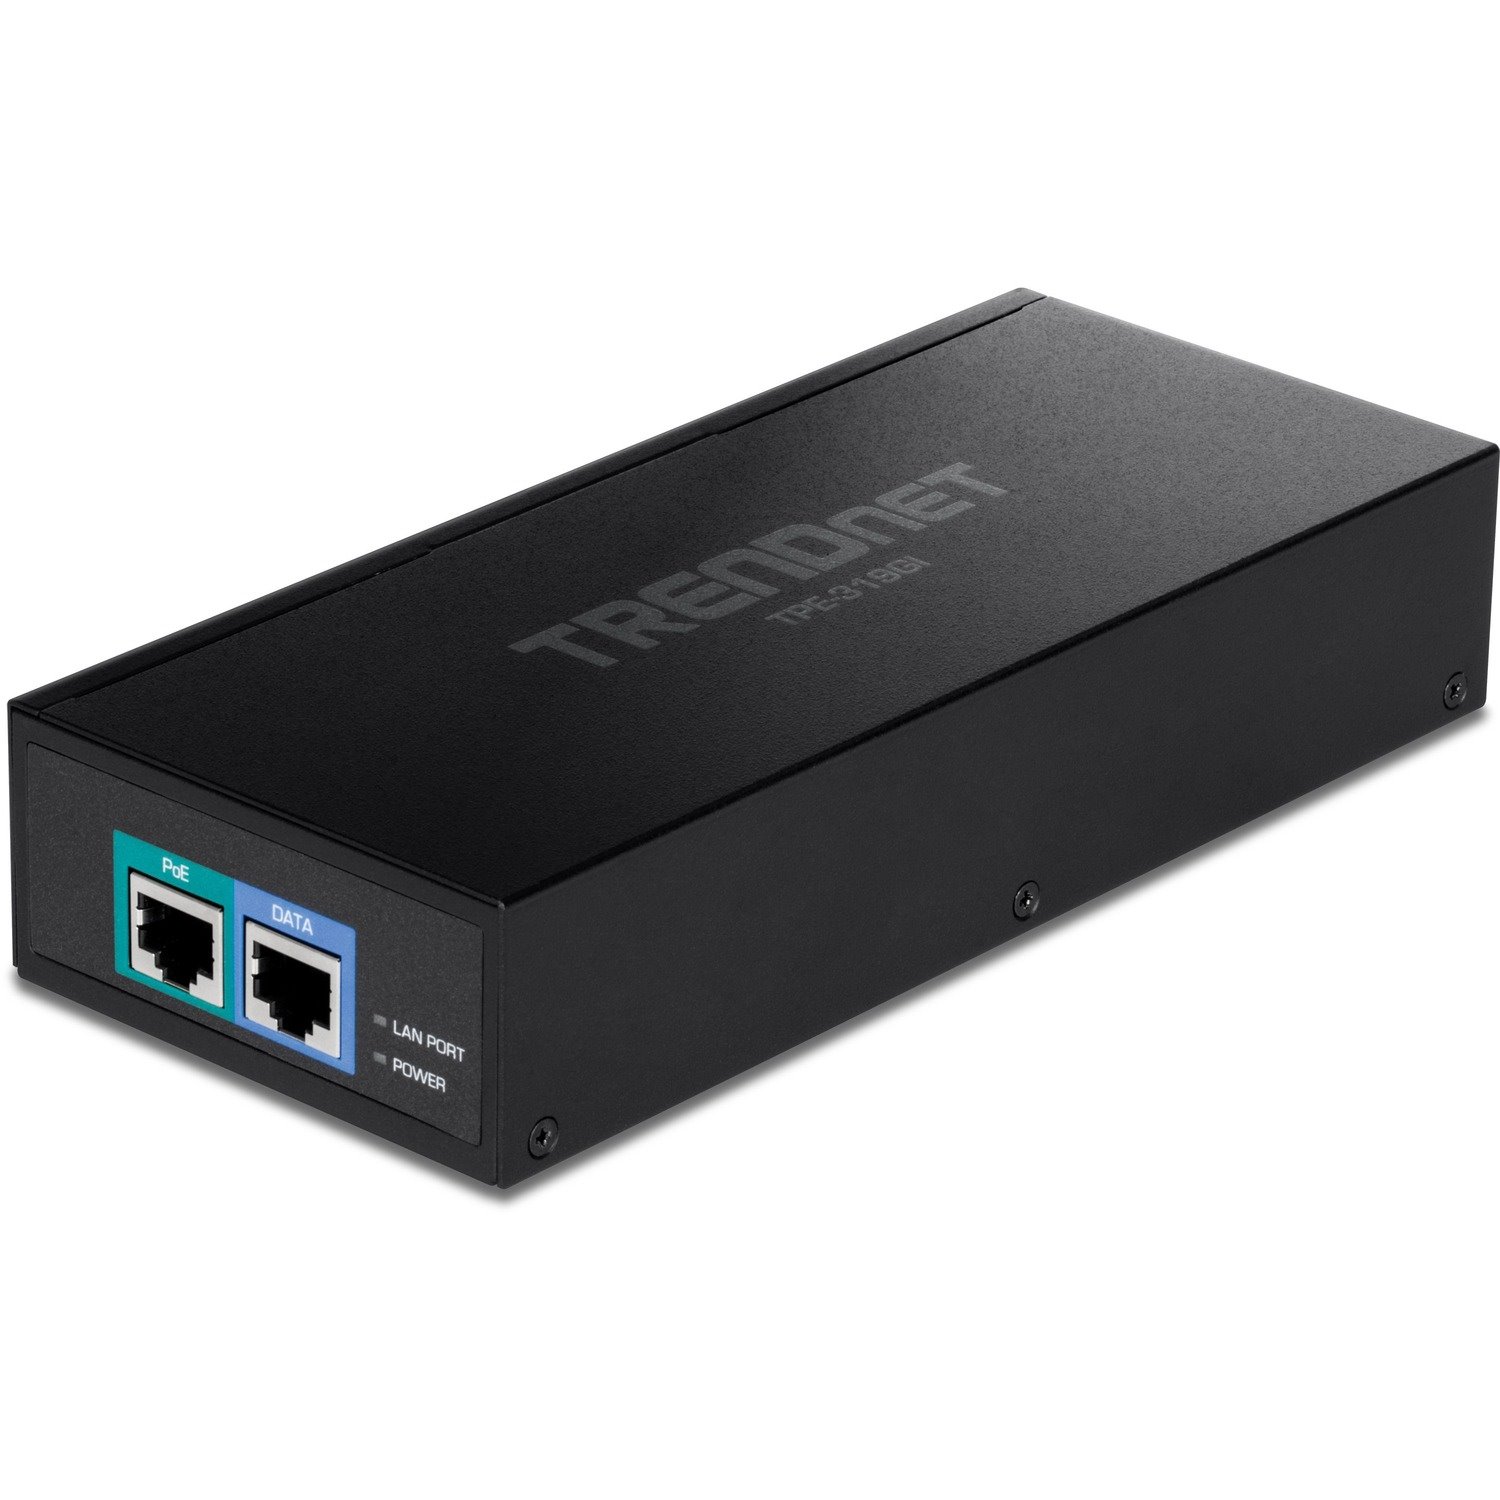 TRENDnet 10G PoE++ Injector, Supplies PoE (15.4W), PoE+ (30W), or PoE++ (90W), Converts a Non-PoE Port To A PoE ++ 10G port, Metal Housing, Black, TPE-319GI